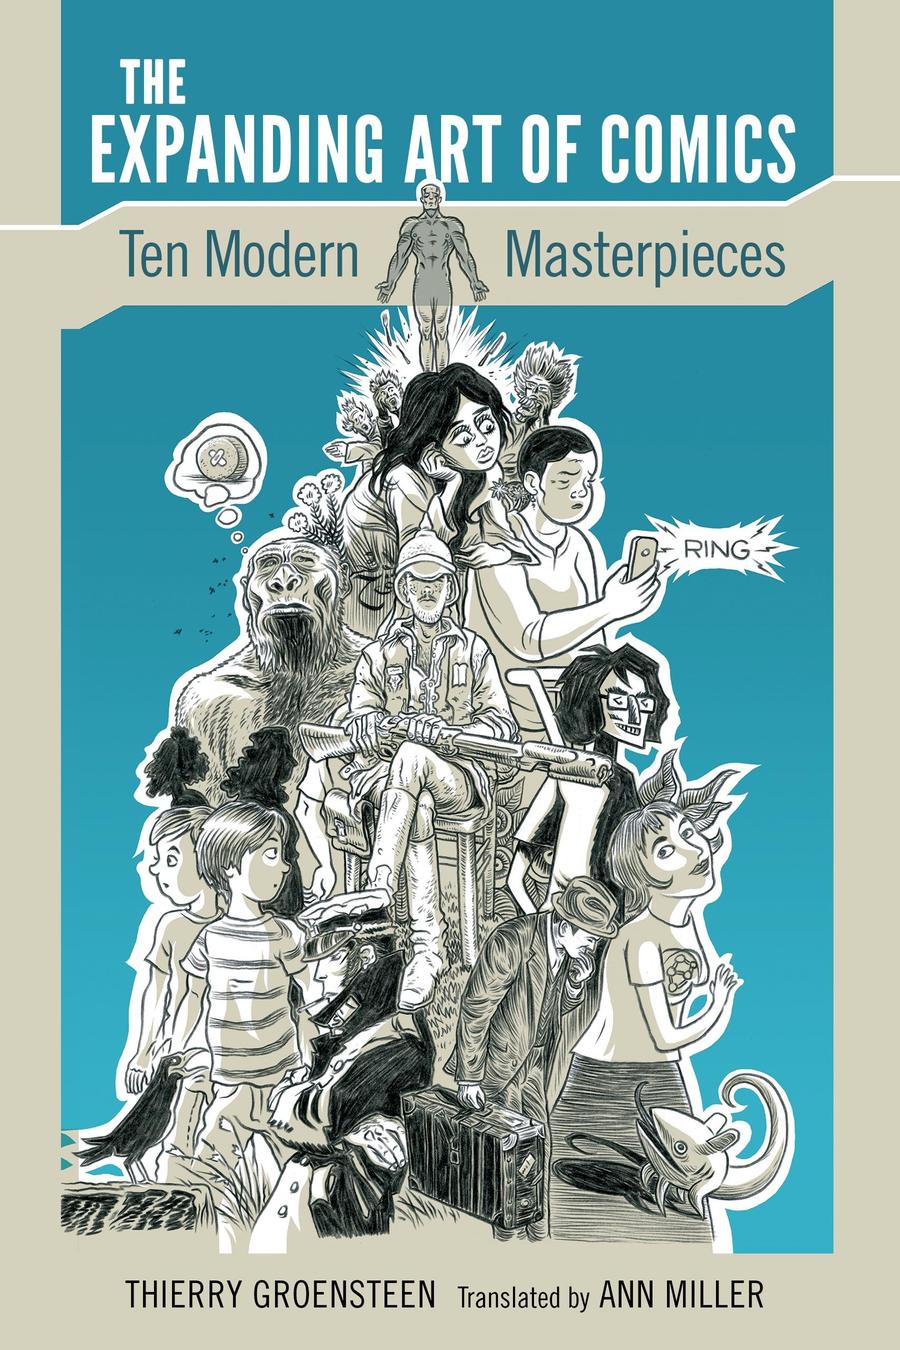 The Expanding Art of Comics: Ten Modern Masterpieces, by Thierry Groensteen, translated by Ann Miller